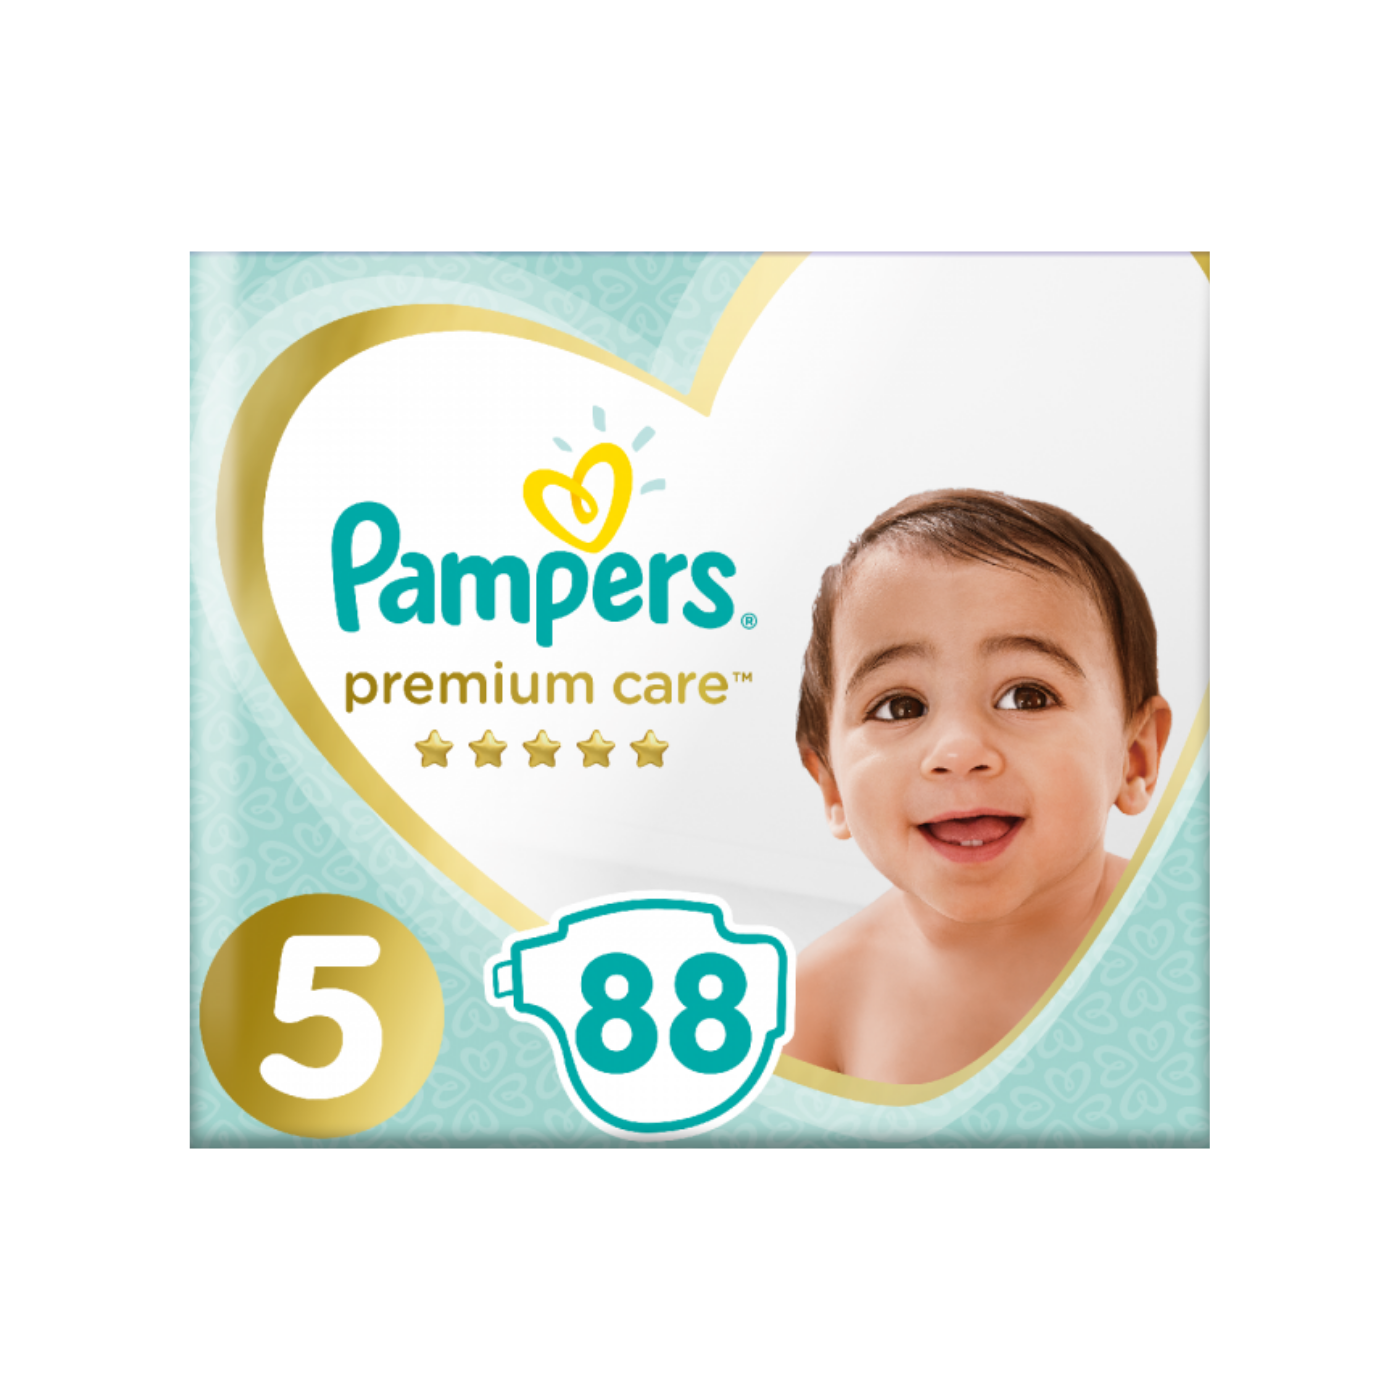 Pampers Premium Care 5, 88 Nappies